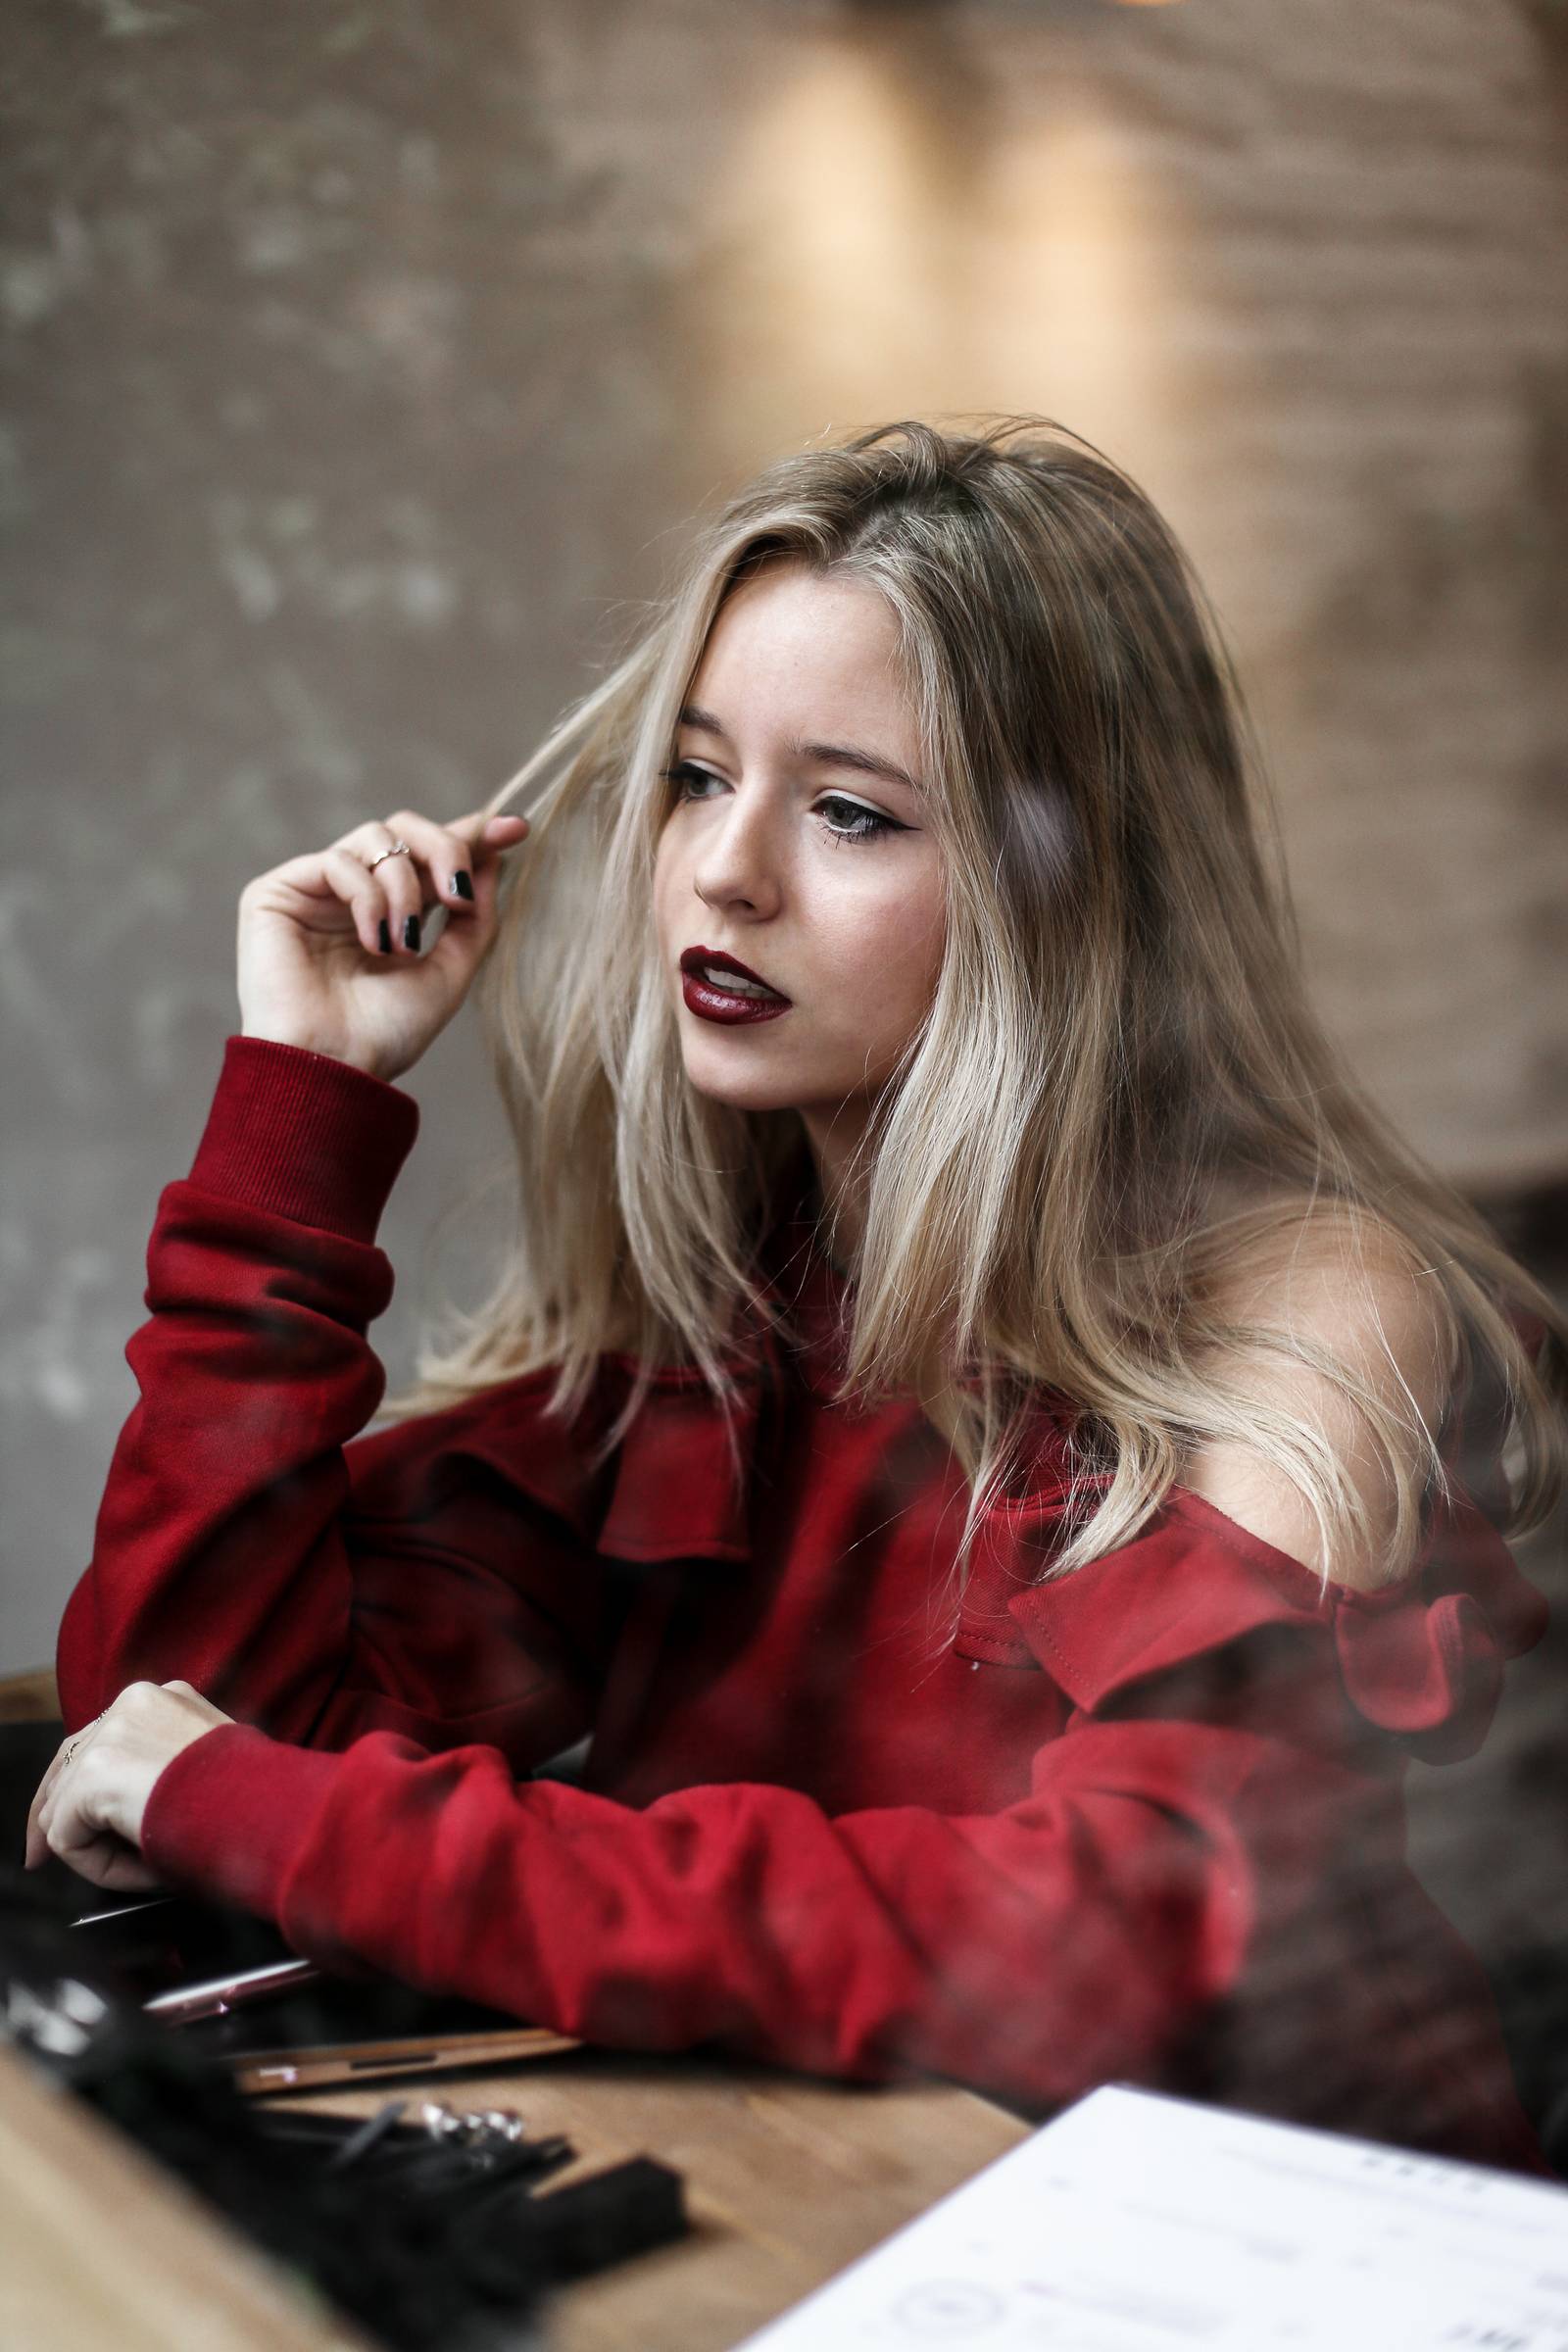 Blond girl, red sweater